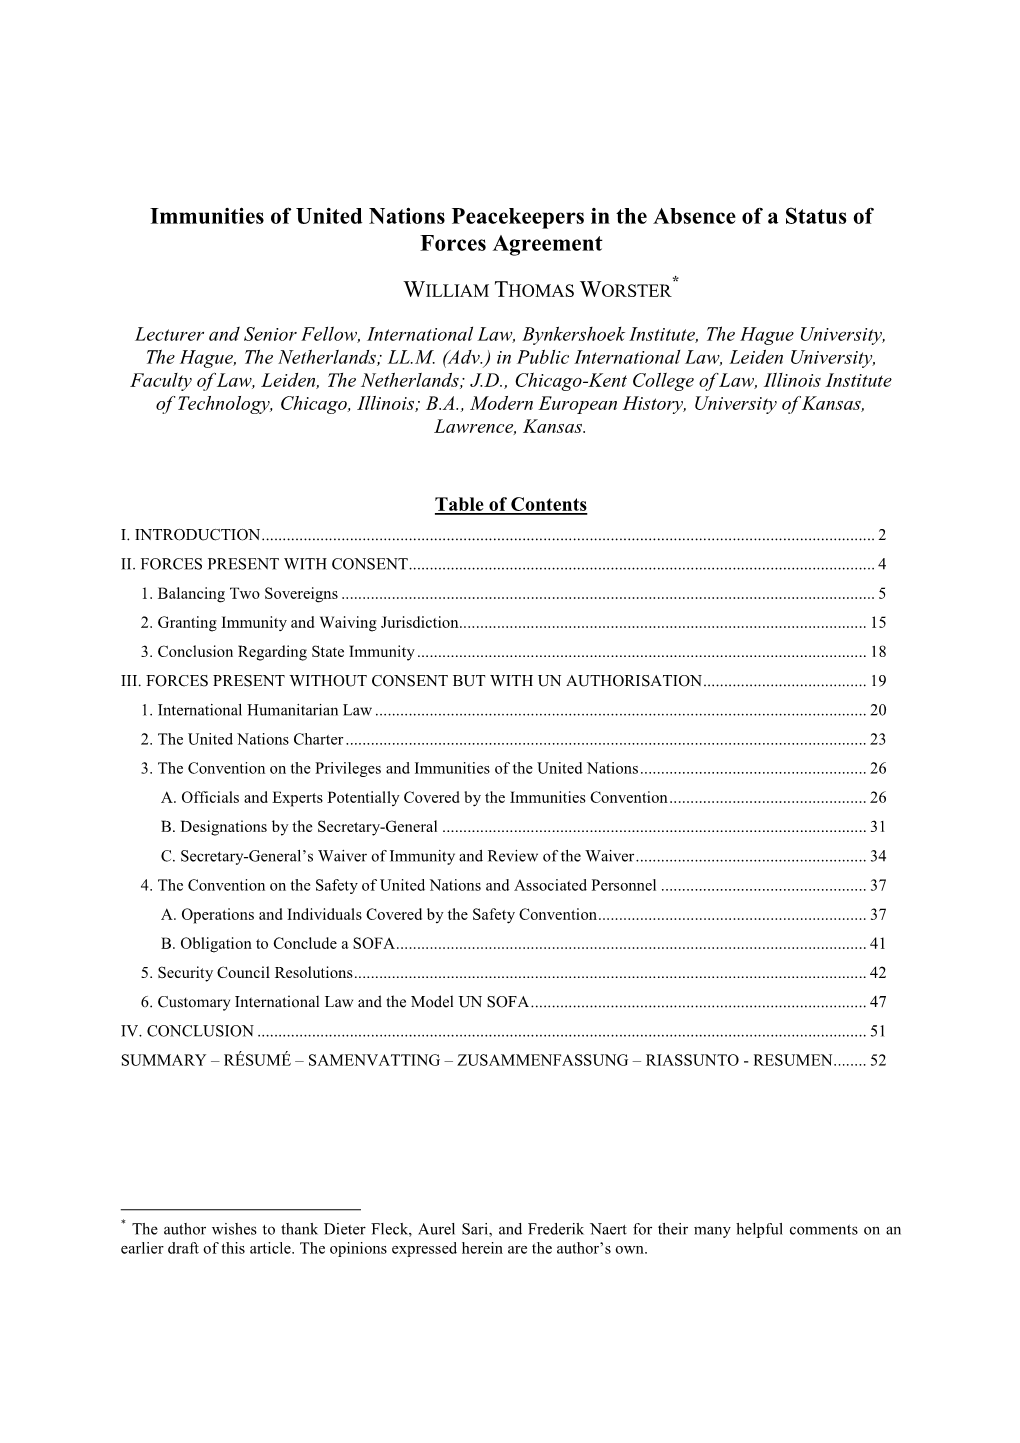 Immunities of United Nations Peacekeepers in the Absence of a Status of Forces Agreement